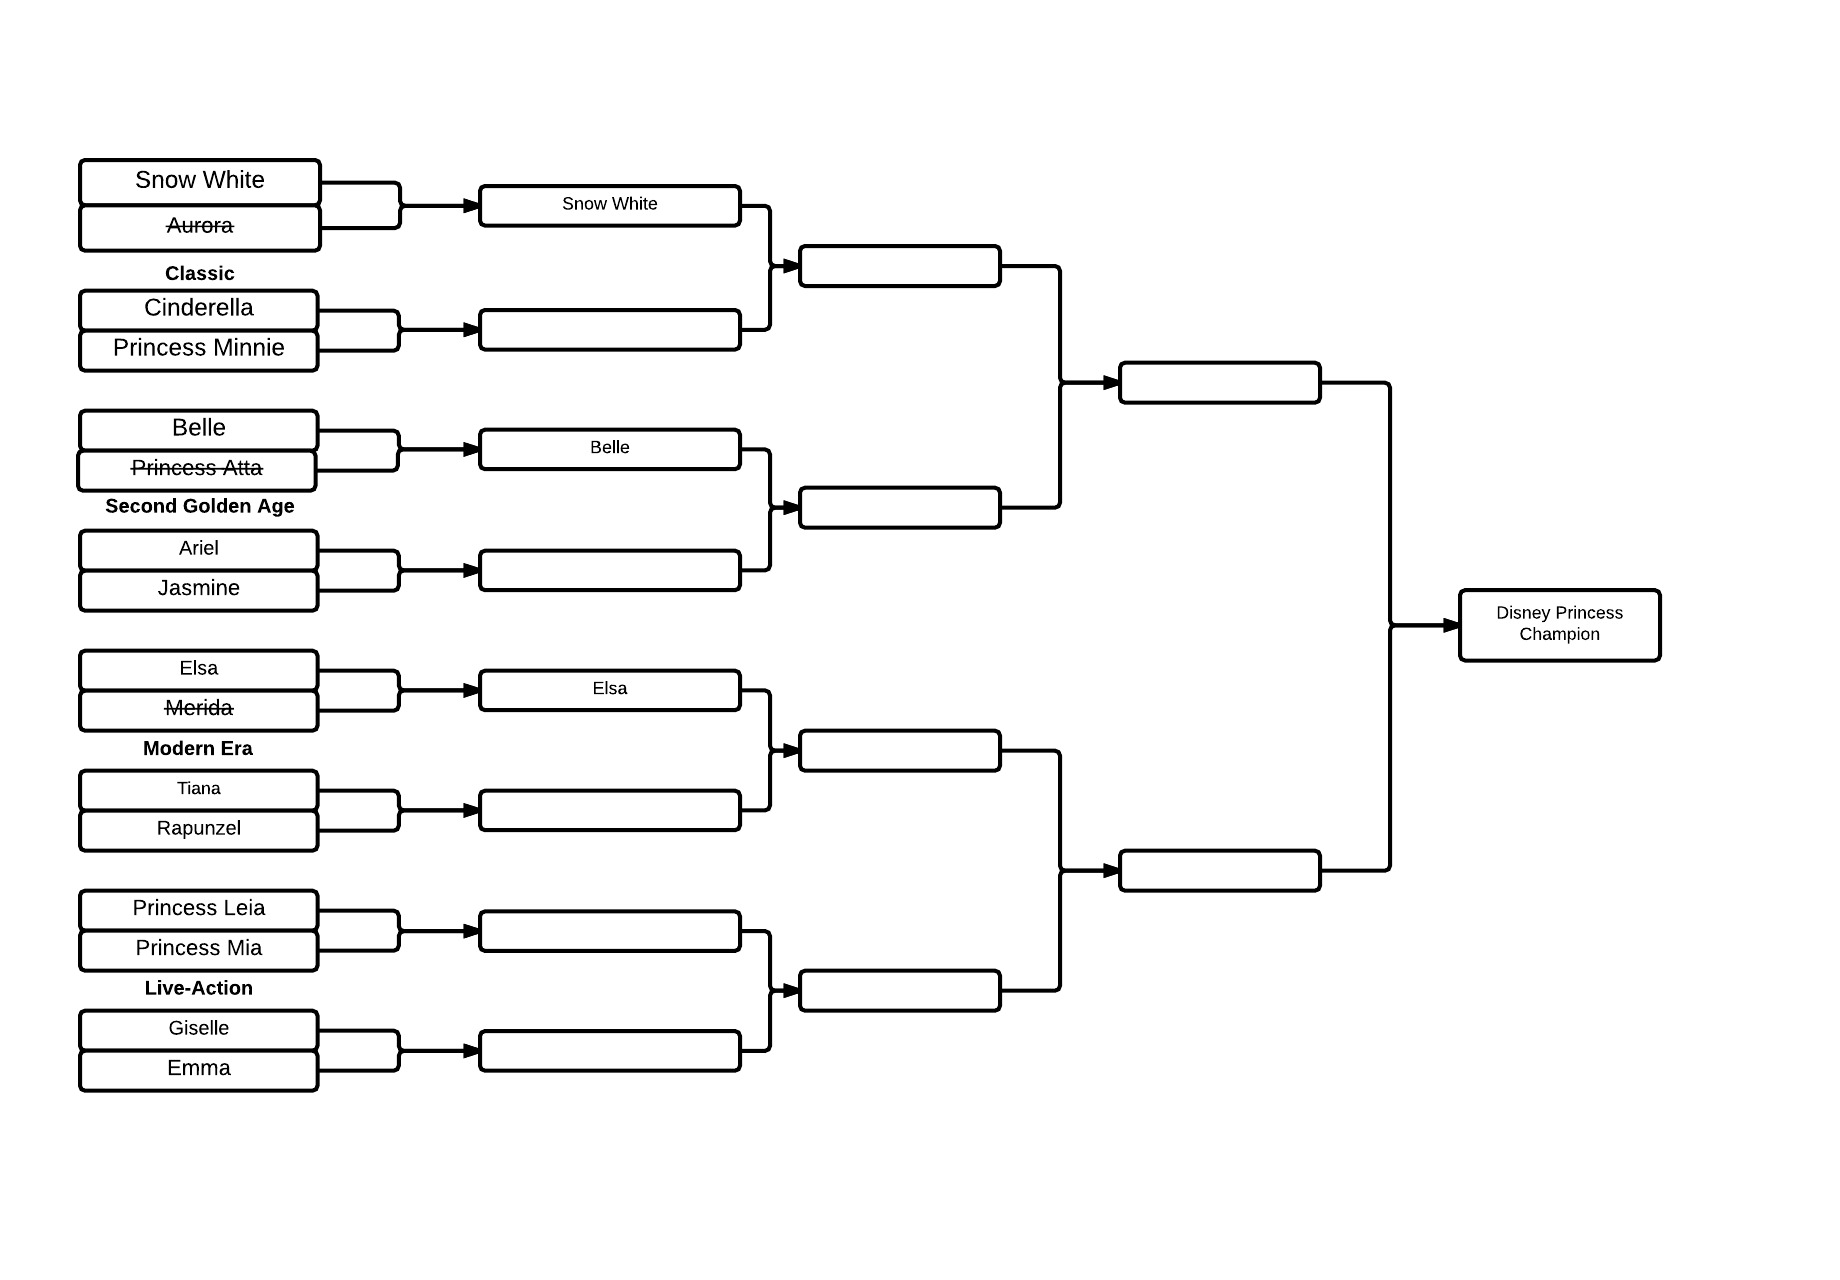 March Madness Bracket 2015 - New Page (2)